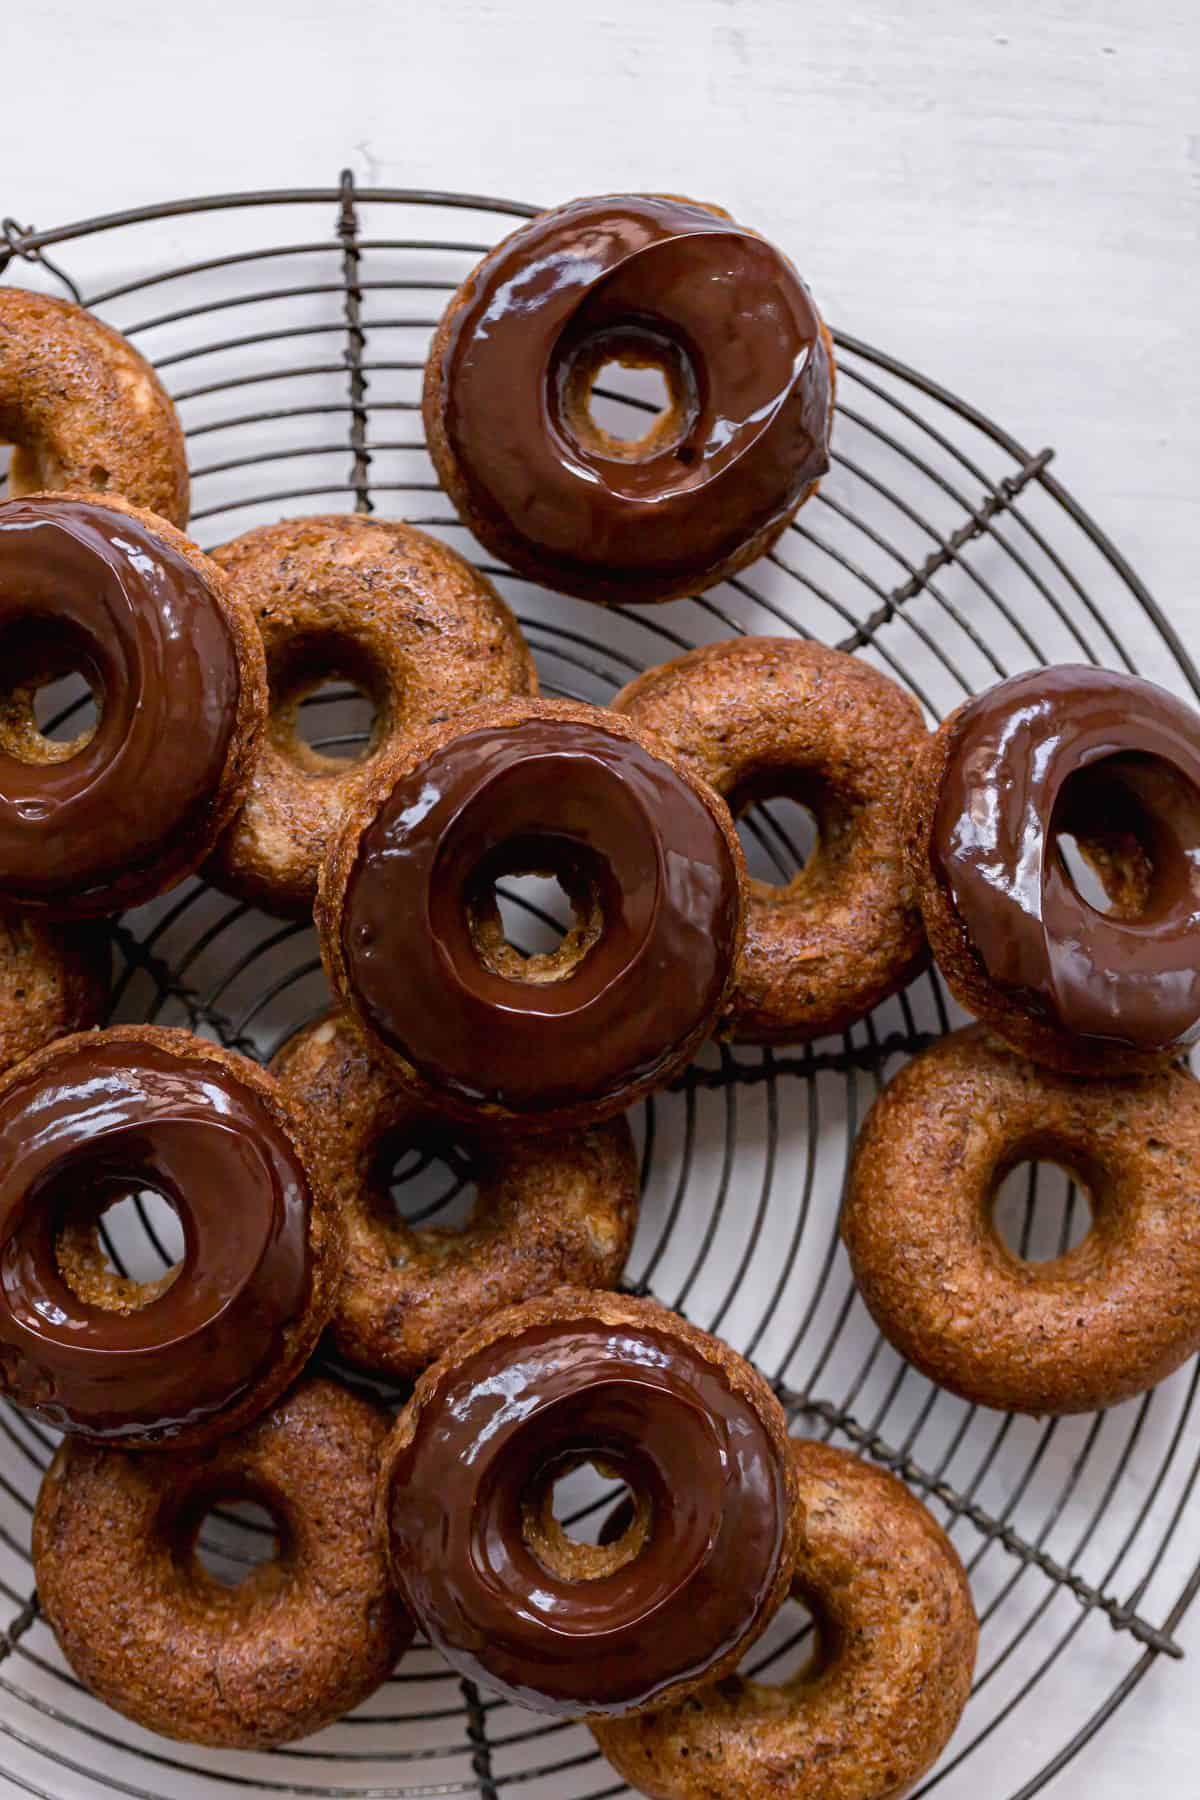 chocolate glazed banana bread donuts piled on round wire rack.